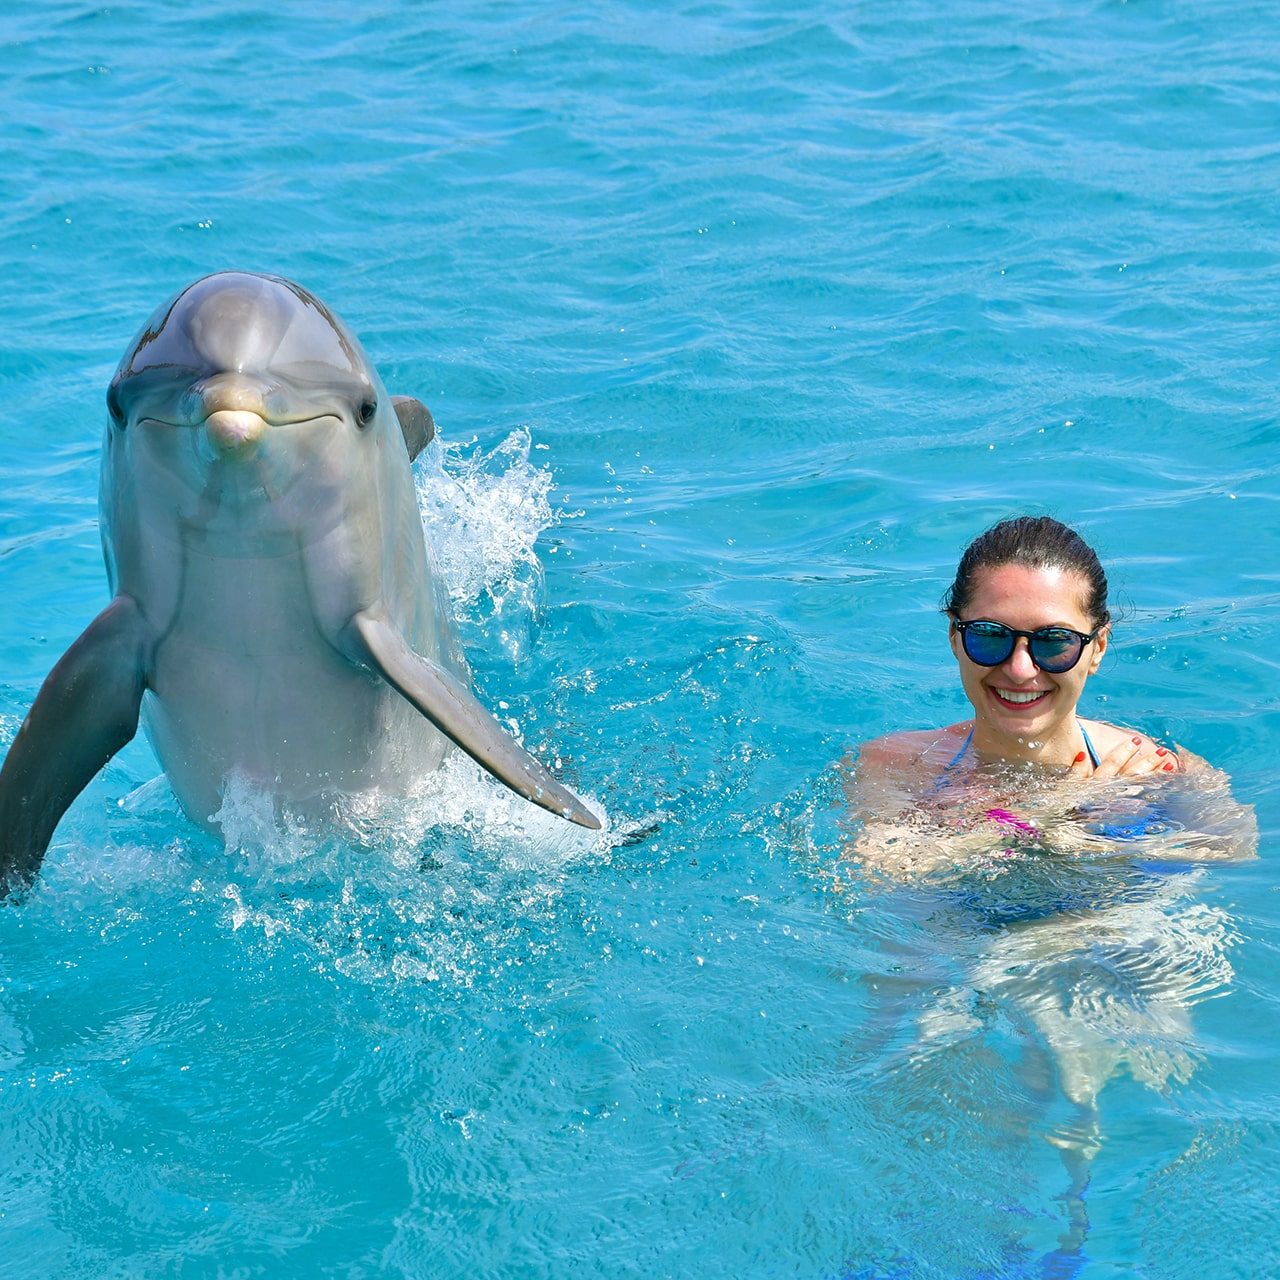 Female tourist and dolphin in the sea, smiling at the camera at the Dolphin Academy Curaçao.